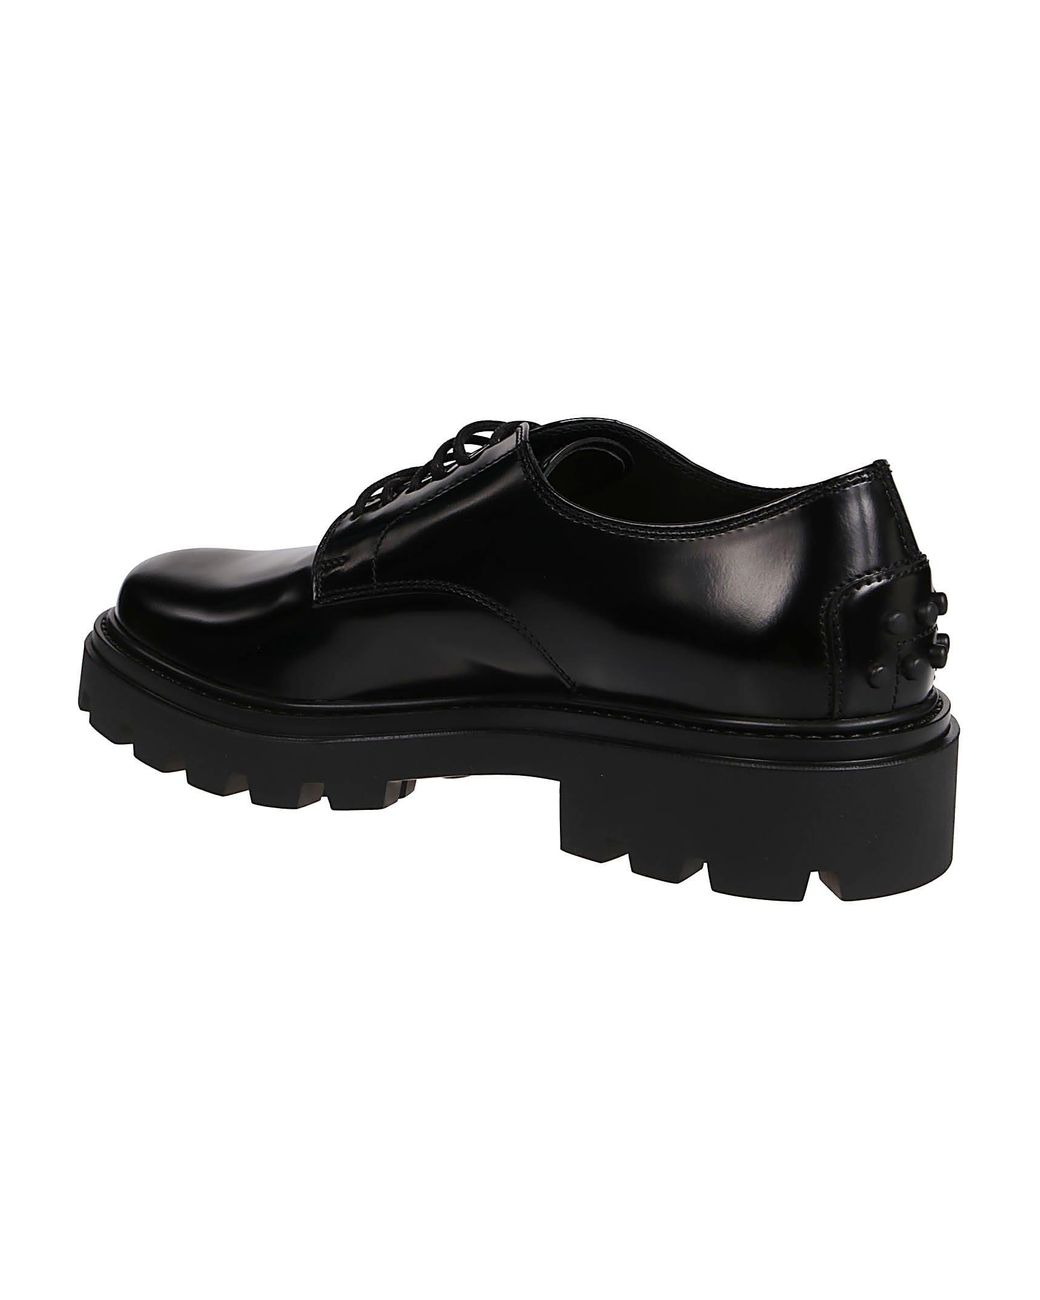 Save 36% Tods Heavy Rubber 08j Derby in Nero for Men Black Mens Shoes Lace-ups Derby shoes 